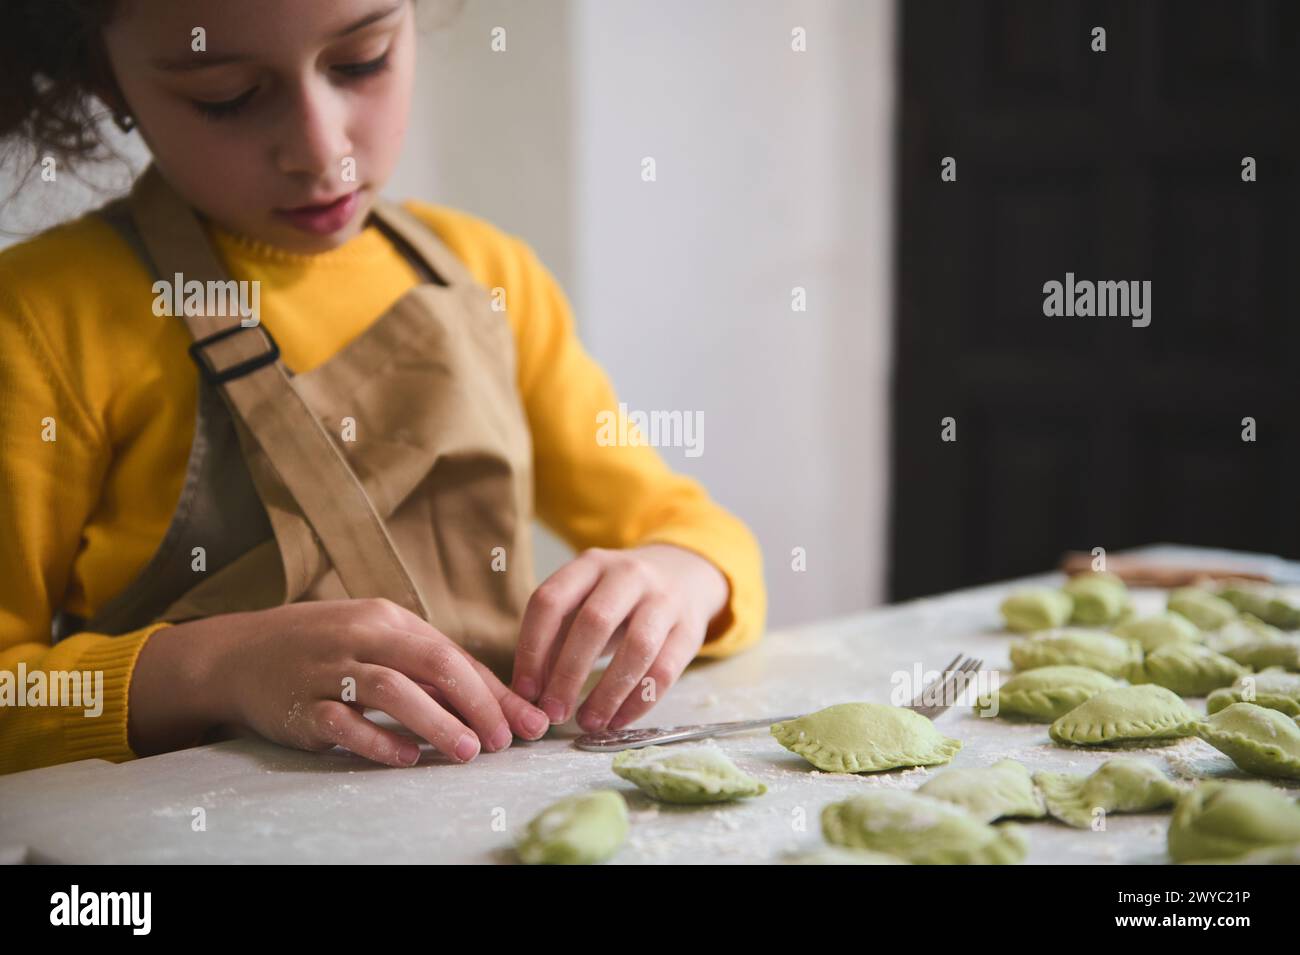 Caucasian adorable little kid girl in the rural kitchen, sculpts dumplings from dough with mashed potatoes filling. Cooking homemade vegetarian dumpli Stock Photo